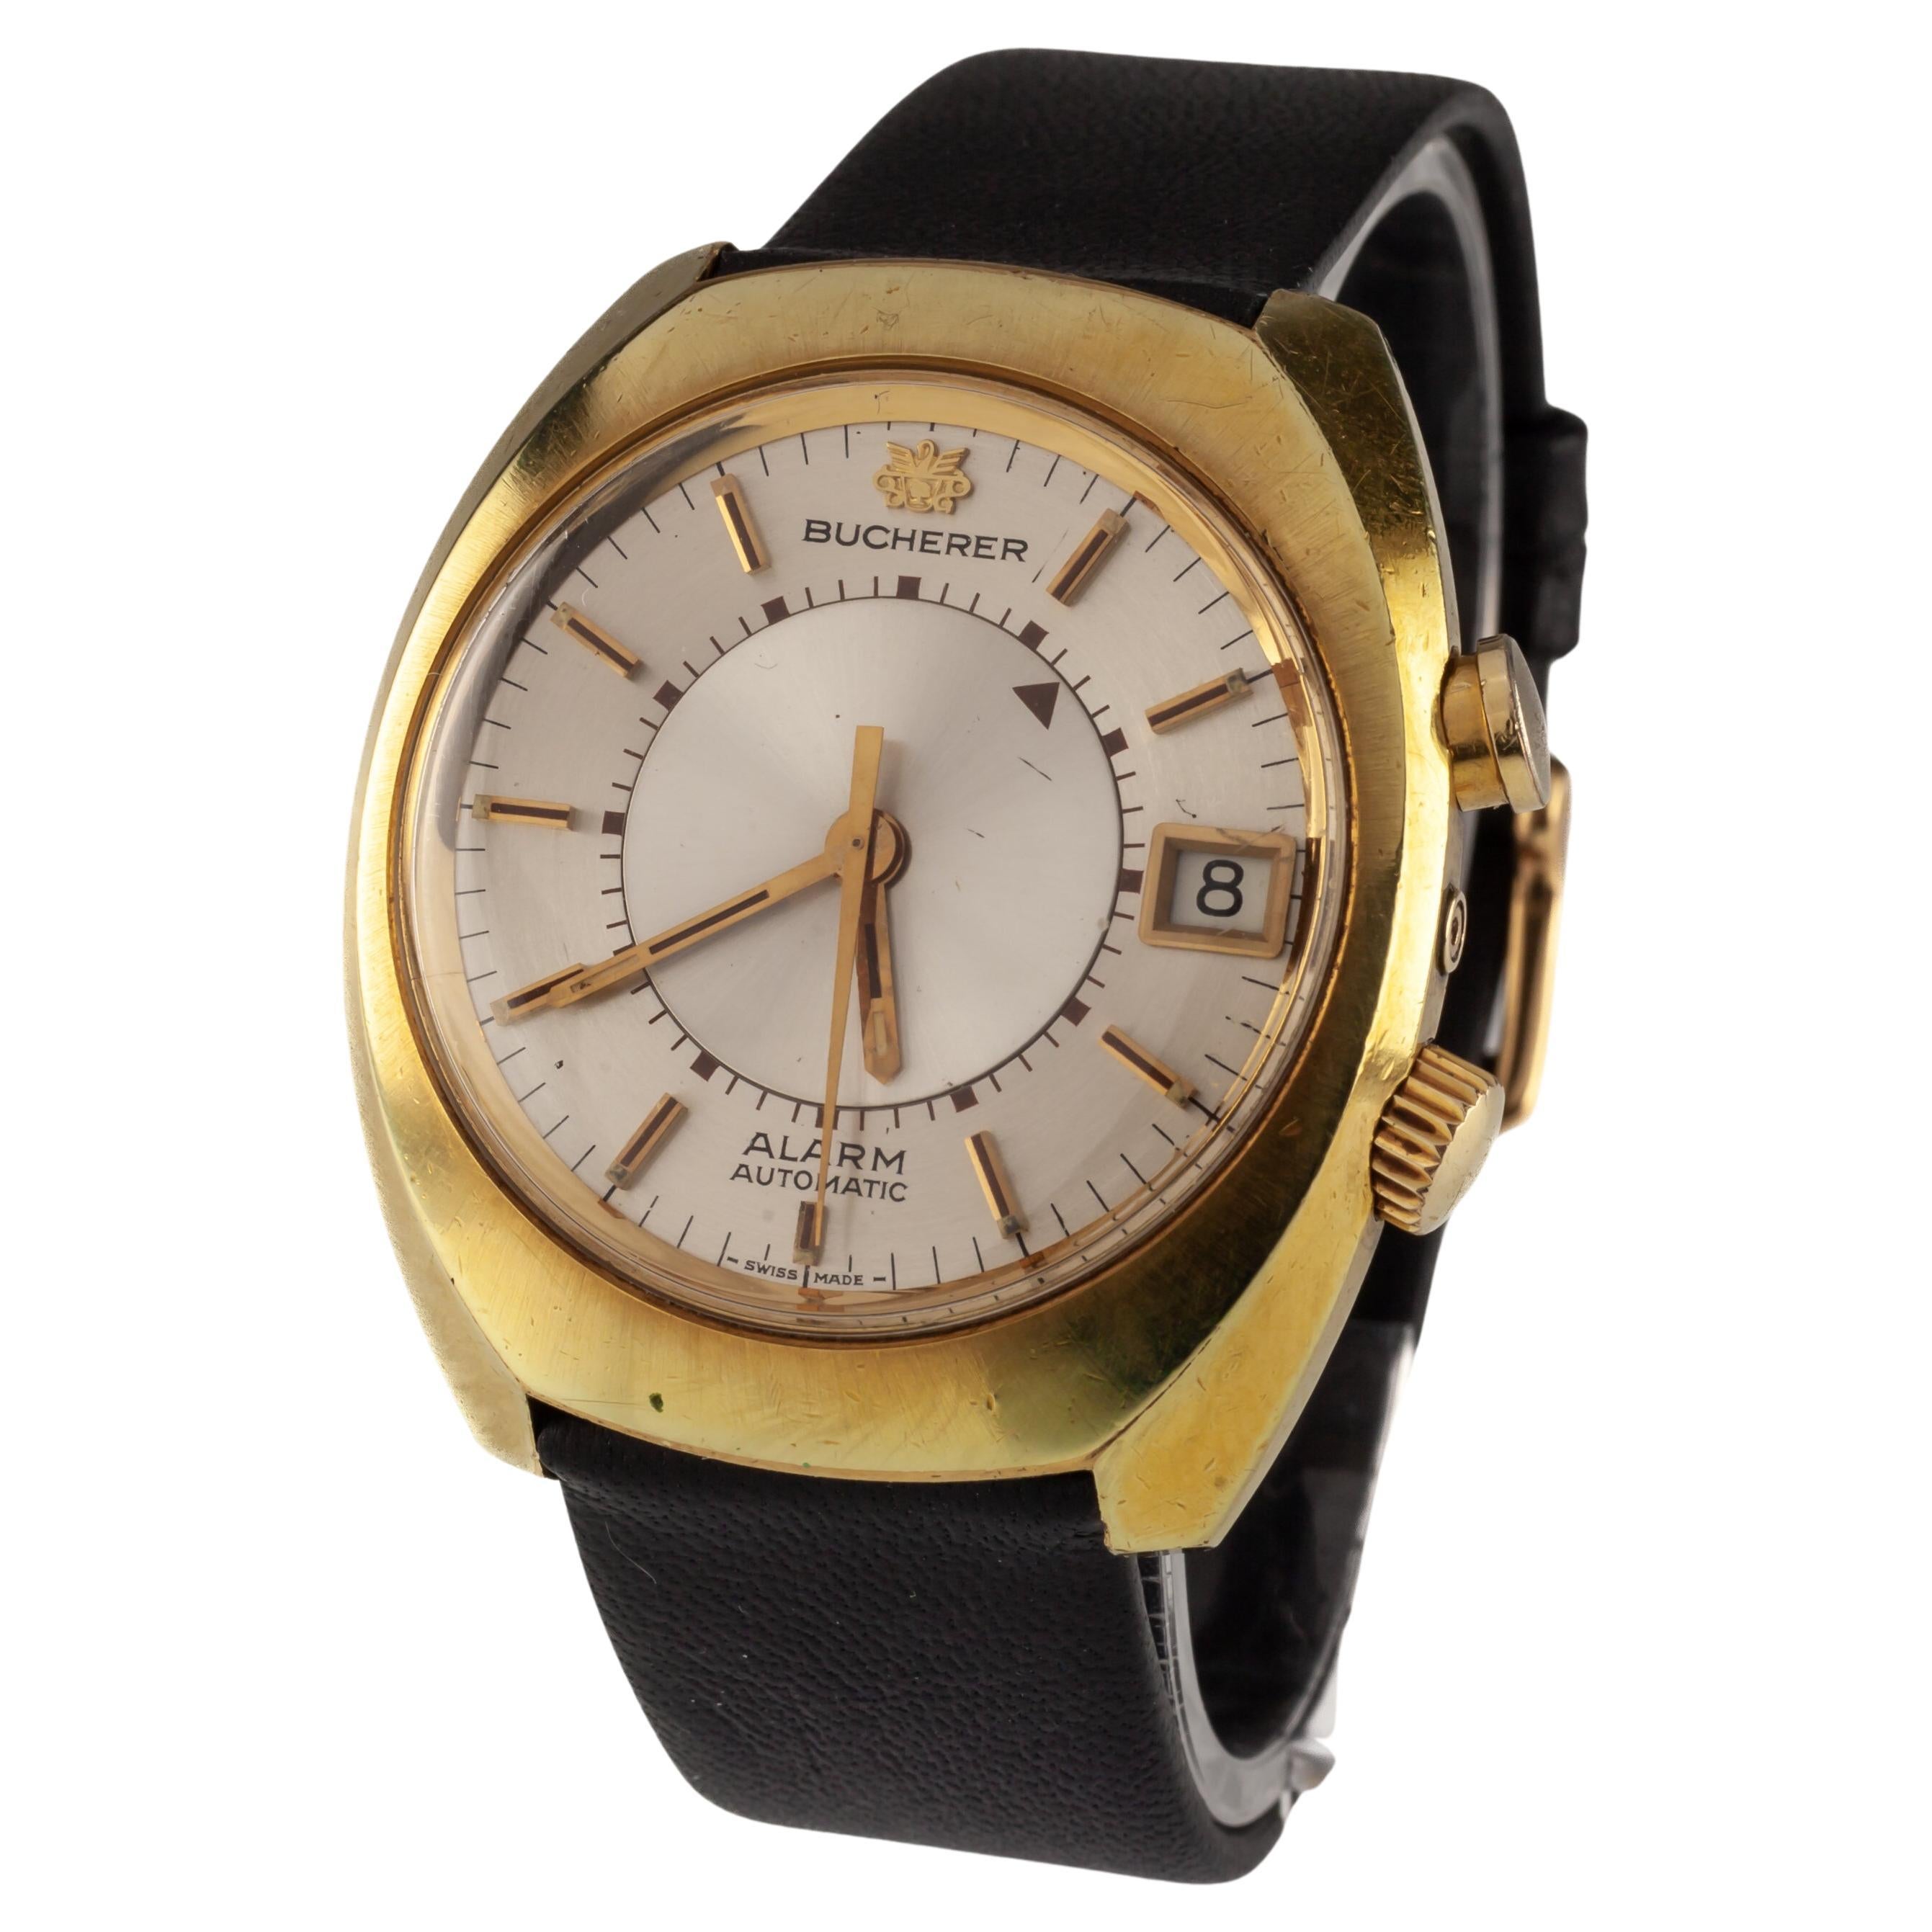 Bucherer Gold-Plated Alarm Watch Automatic "Memomatic" w/ Leather Band 2980 Date